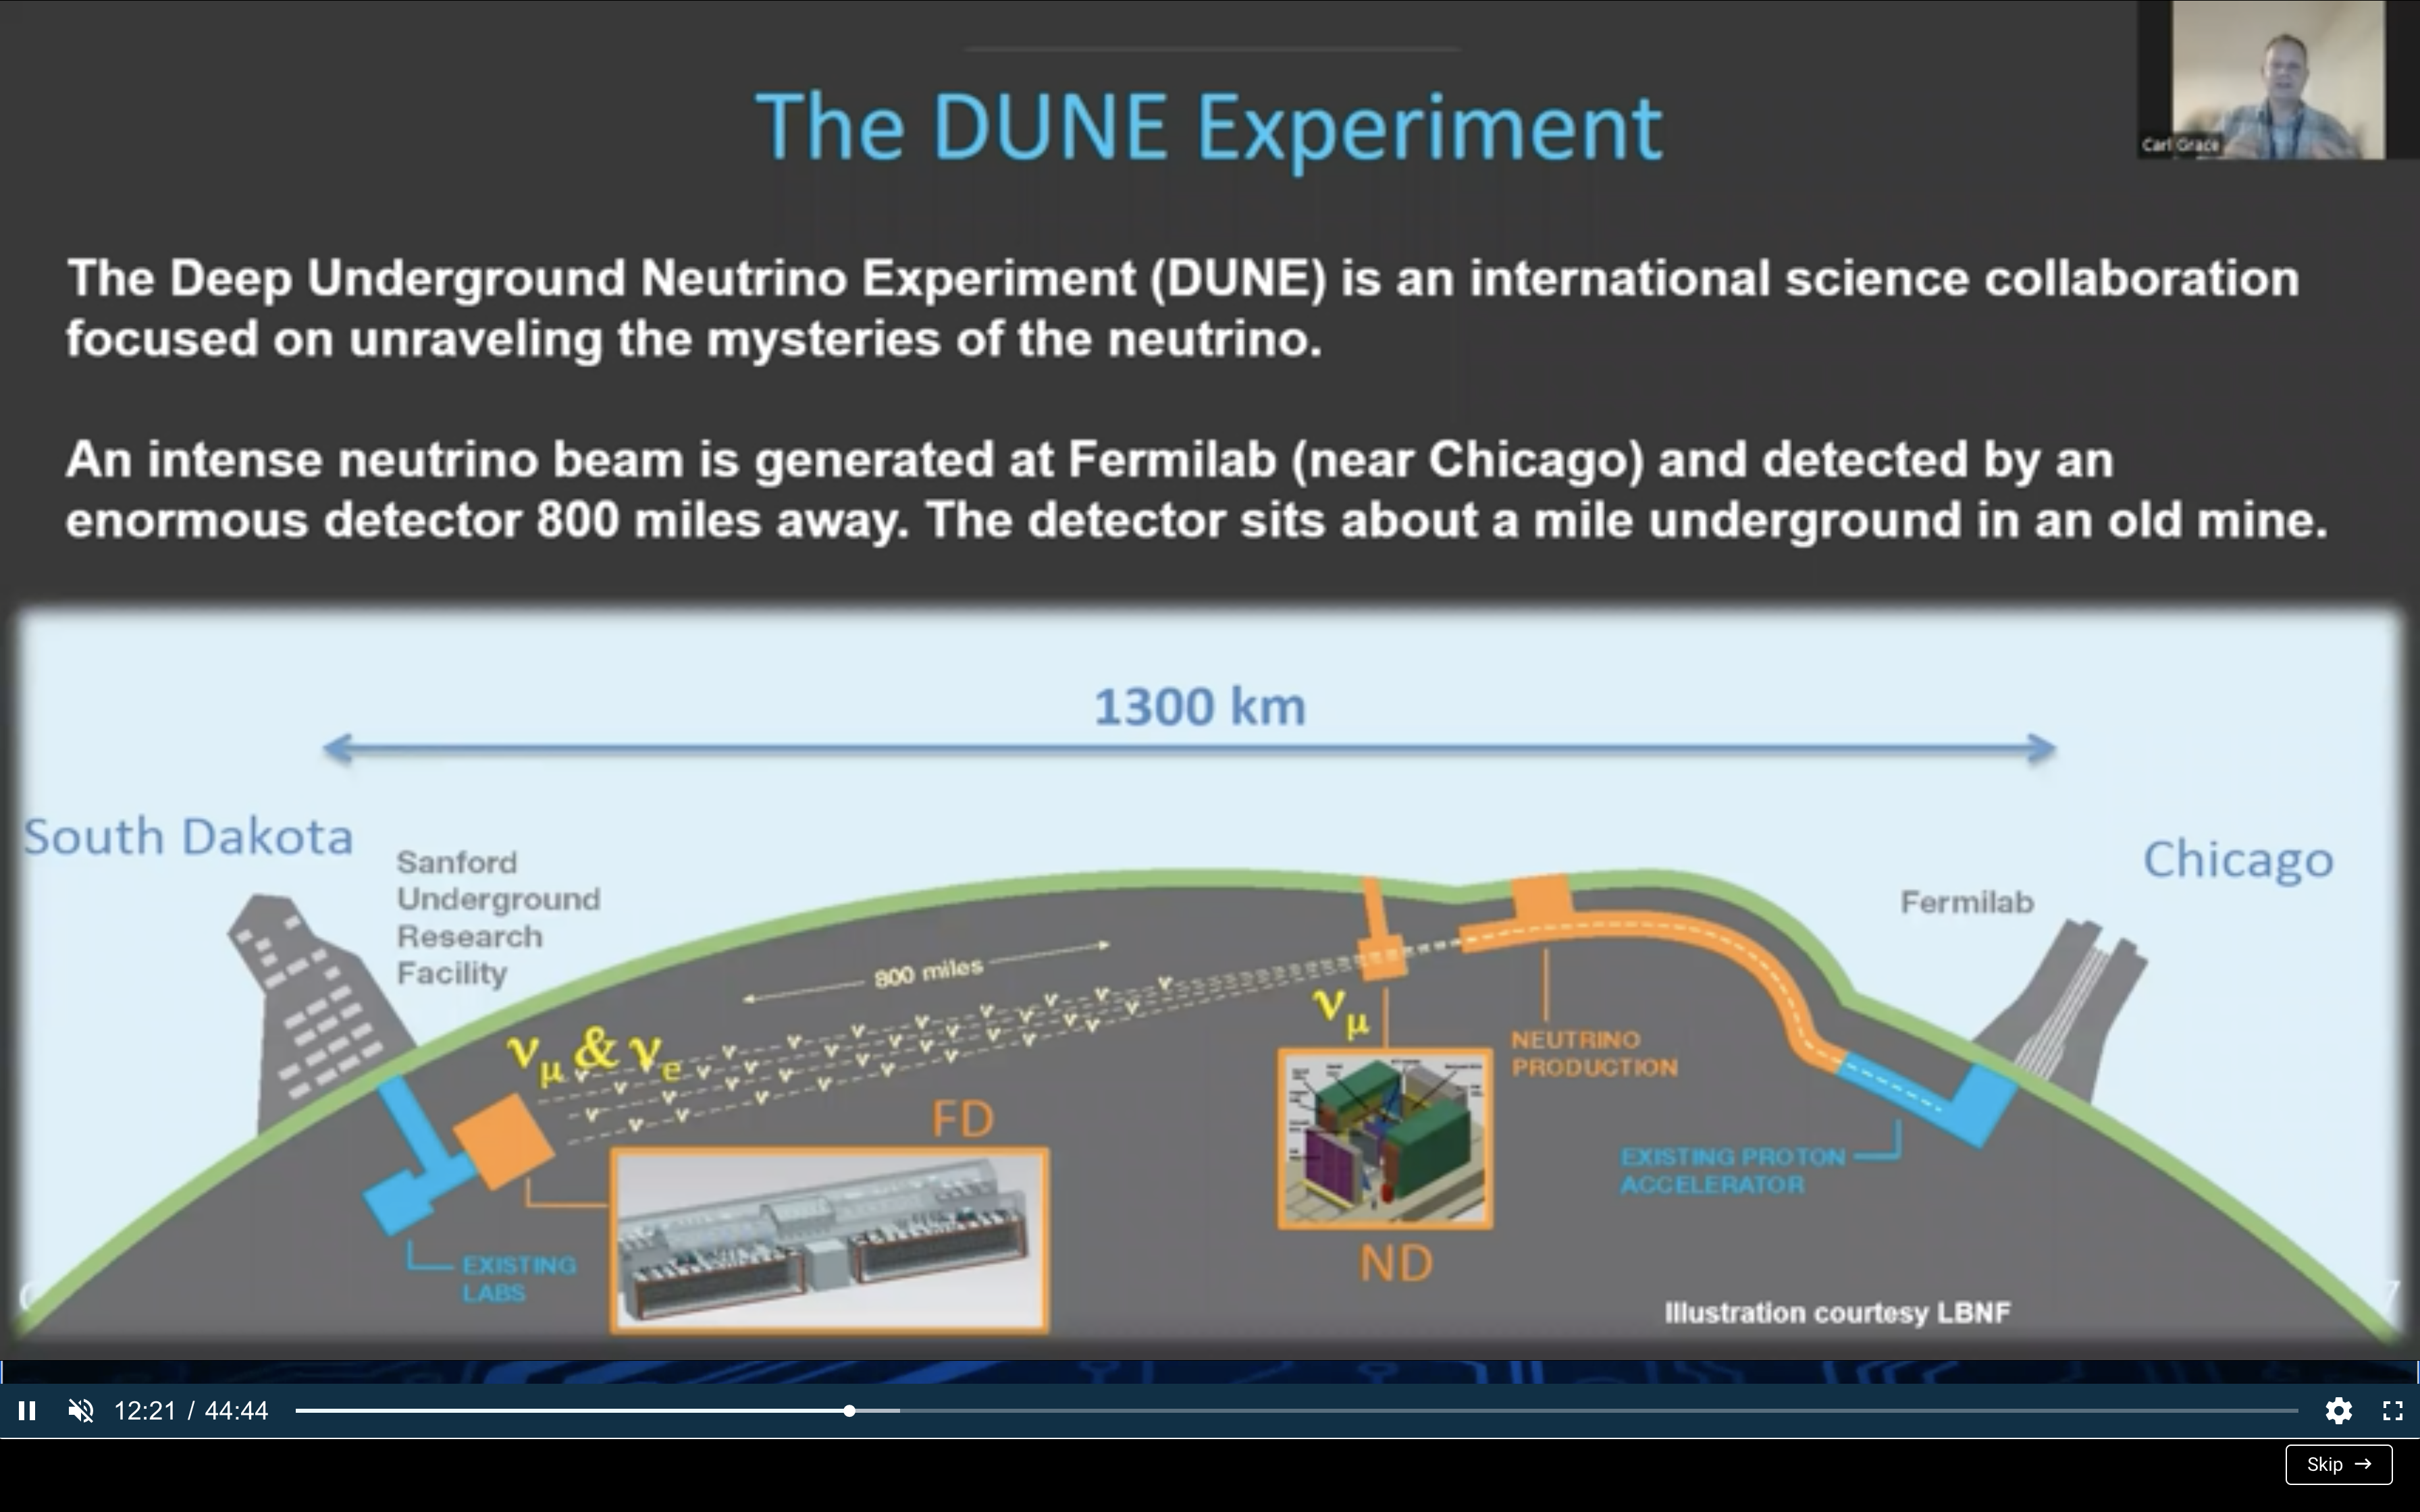 The DUNE Experiment